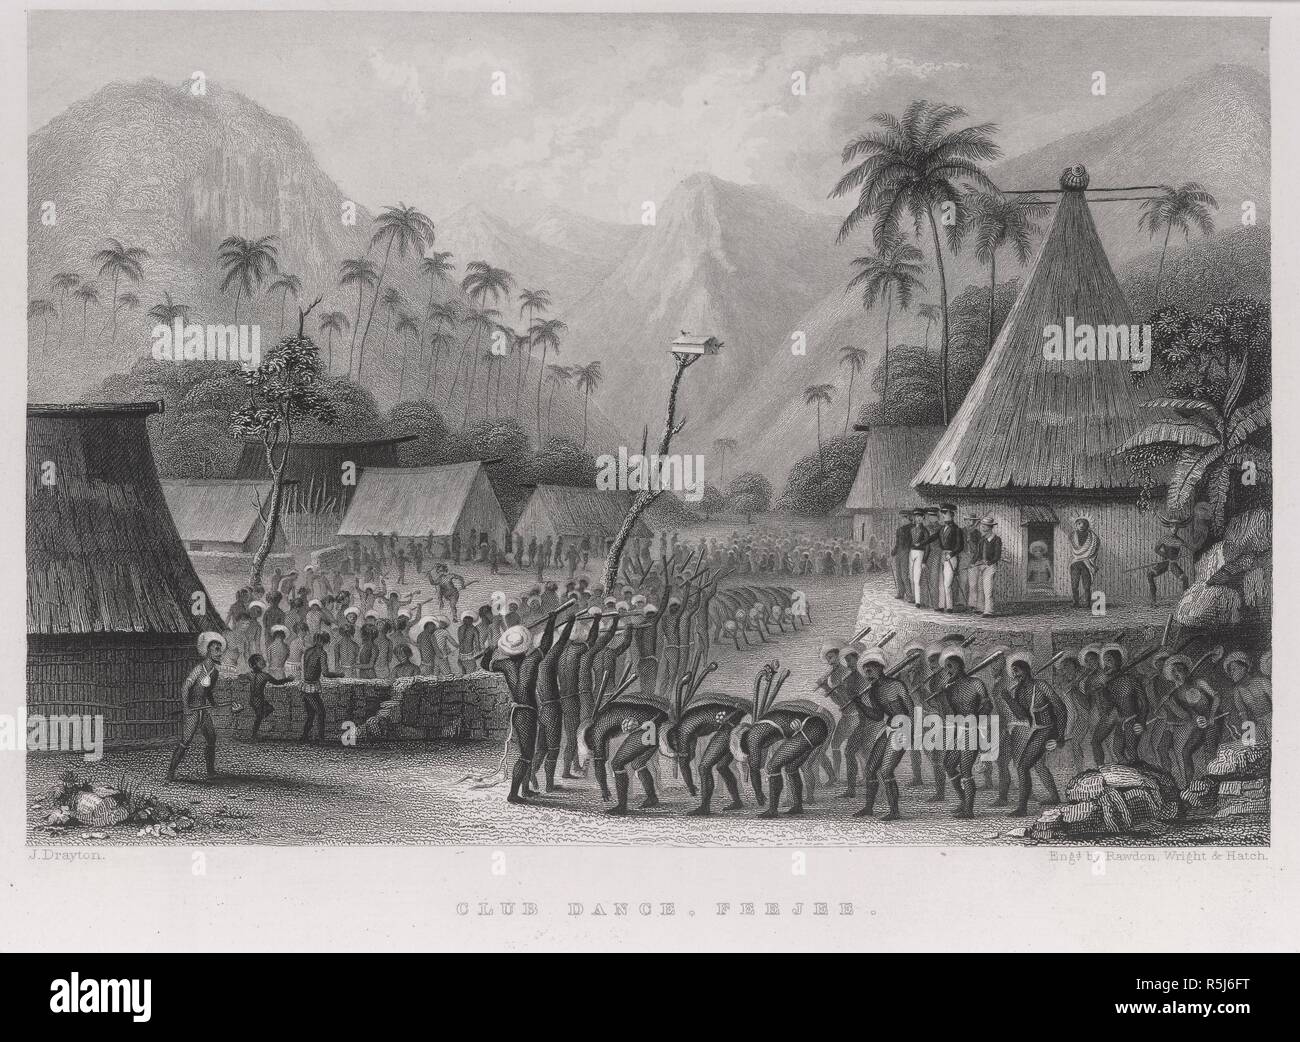 Club dance, Feejee. Narrative of the United States Exploring Expeditio. 1844. A club dance in Fiji.  Image taken from Narrative of the United States Exploring Expedition 1838-1842.  Originally published/produced in 1844. . Source: 10001.d volume 3, opposite 158. Language: English. Author: WILKES, CHARLES. Wright. Rawdon. Drayton, J. HATCH. Stock Photo